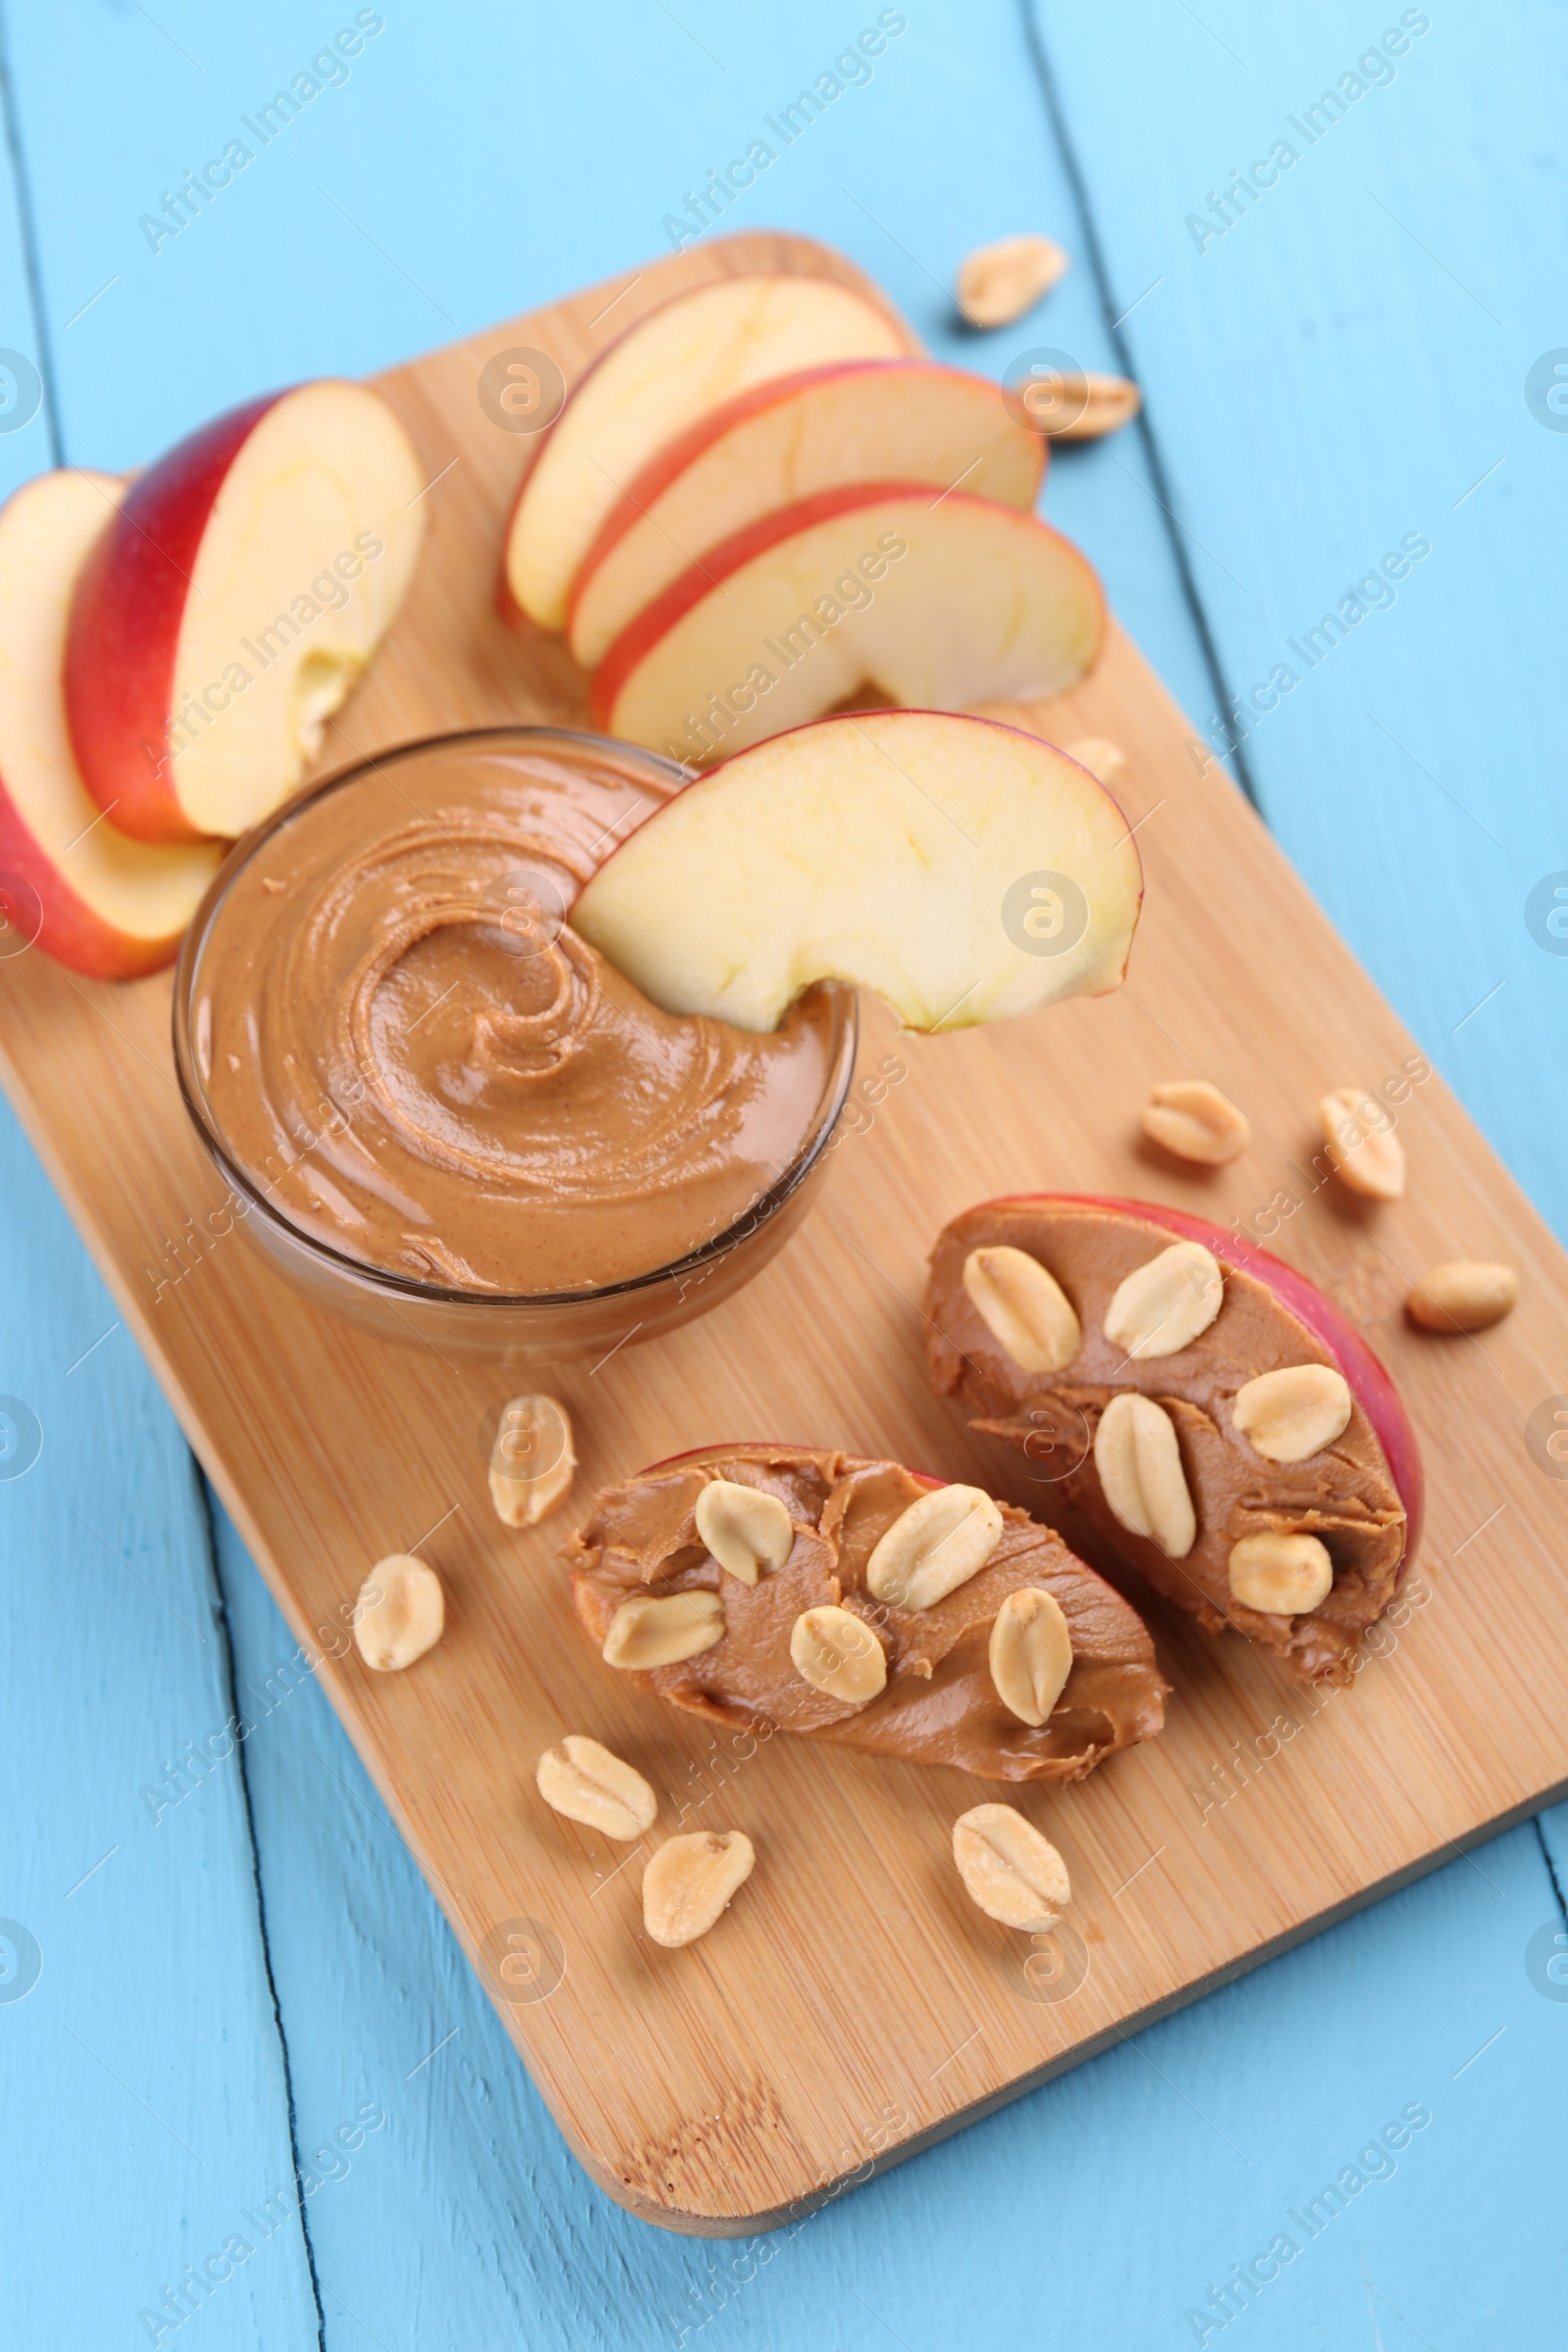 Photo of Slices of fresh apple with peanut butter and nuts on light blue wooden table, above view